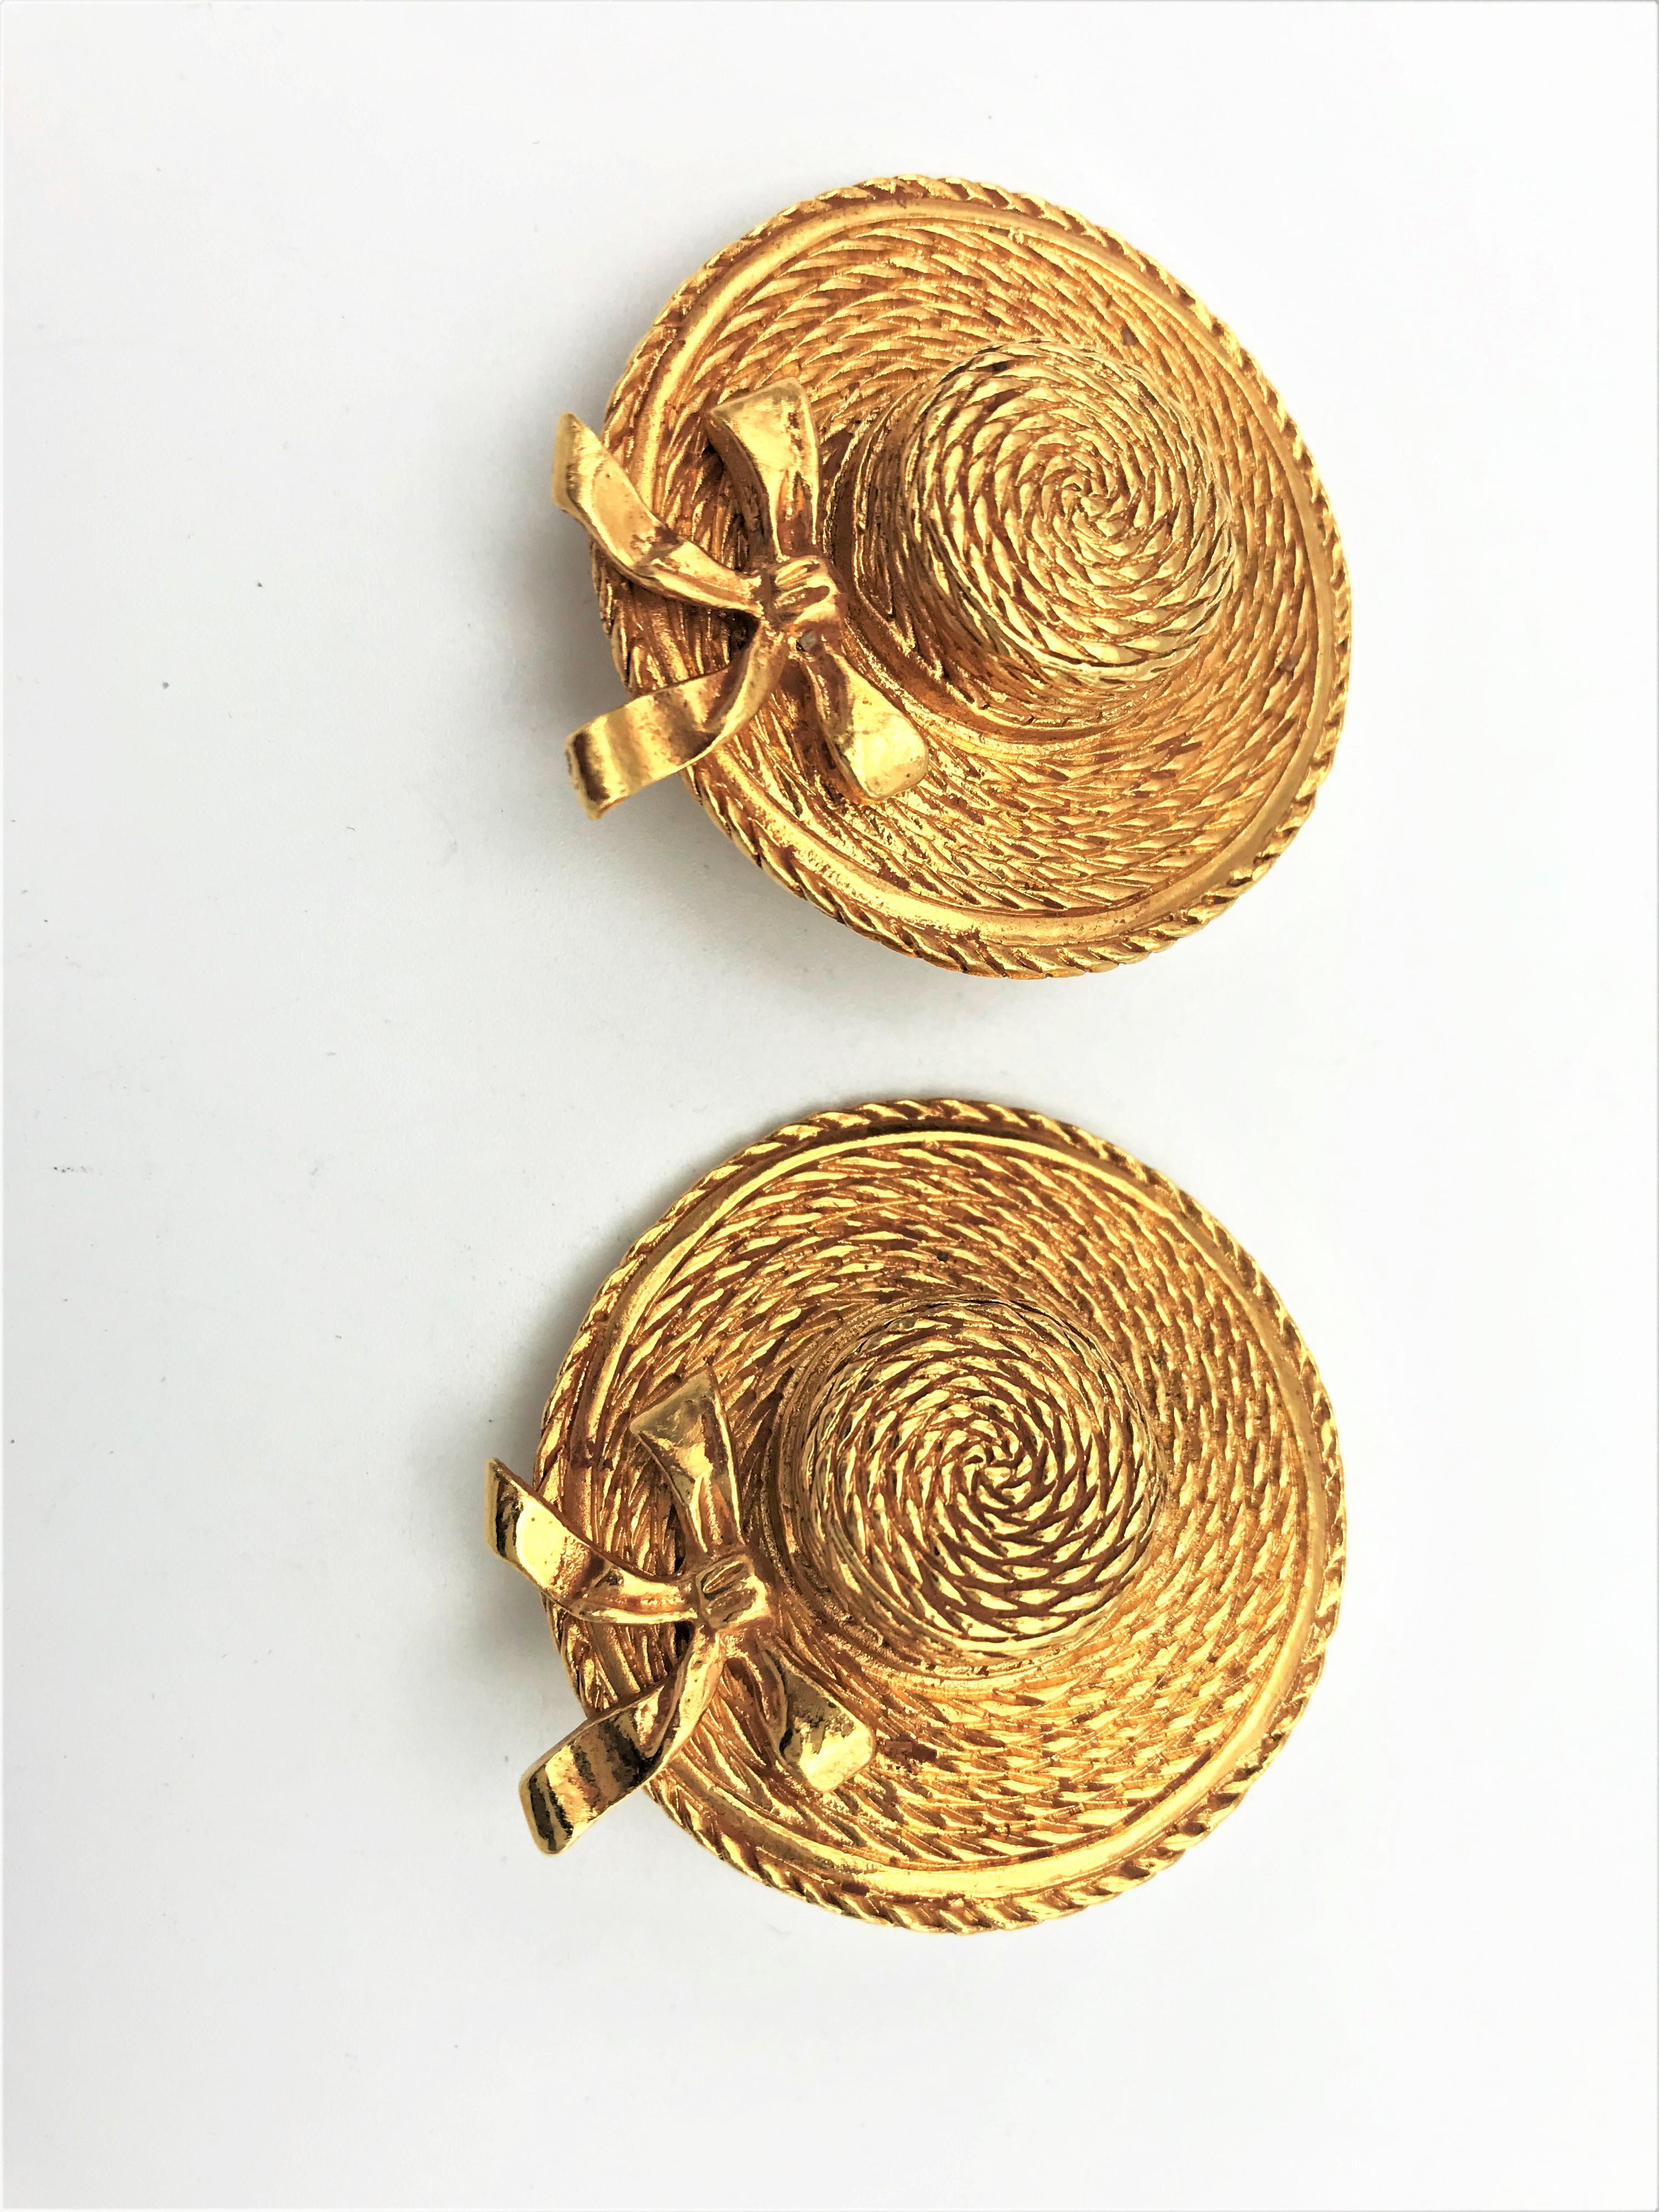 Women's Chanel Clip-on Earrings in the shape of a hat, signed 1970/80s gold plated  For Sale